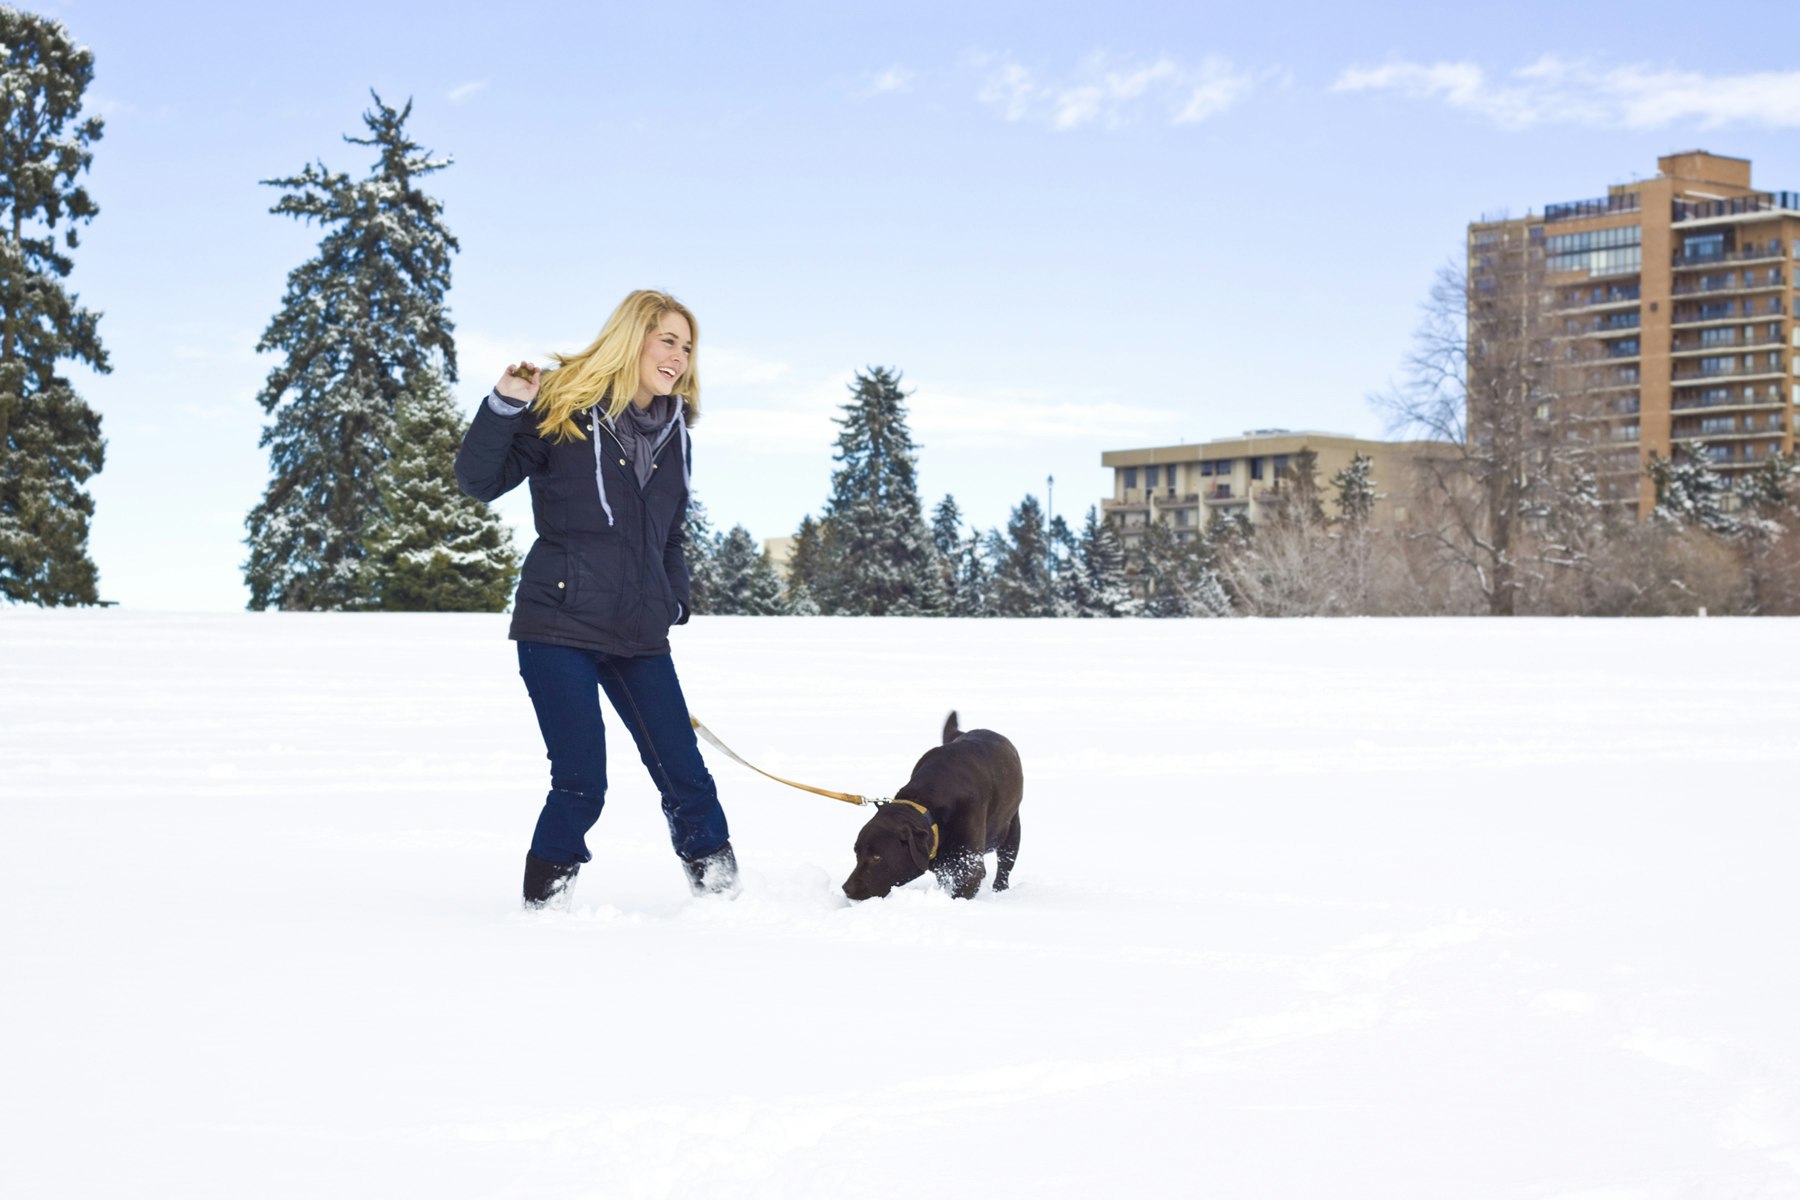 A woman plays with a dog in a snowy park in Denver, Colorado